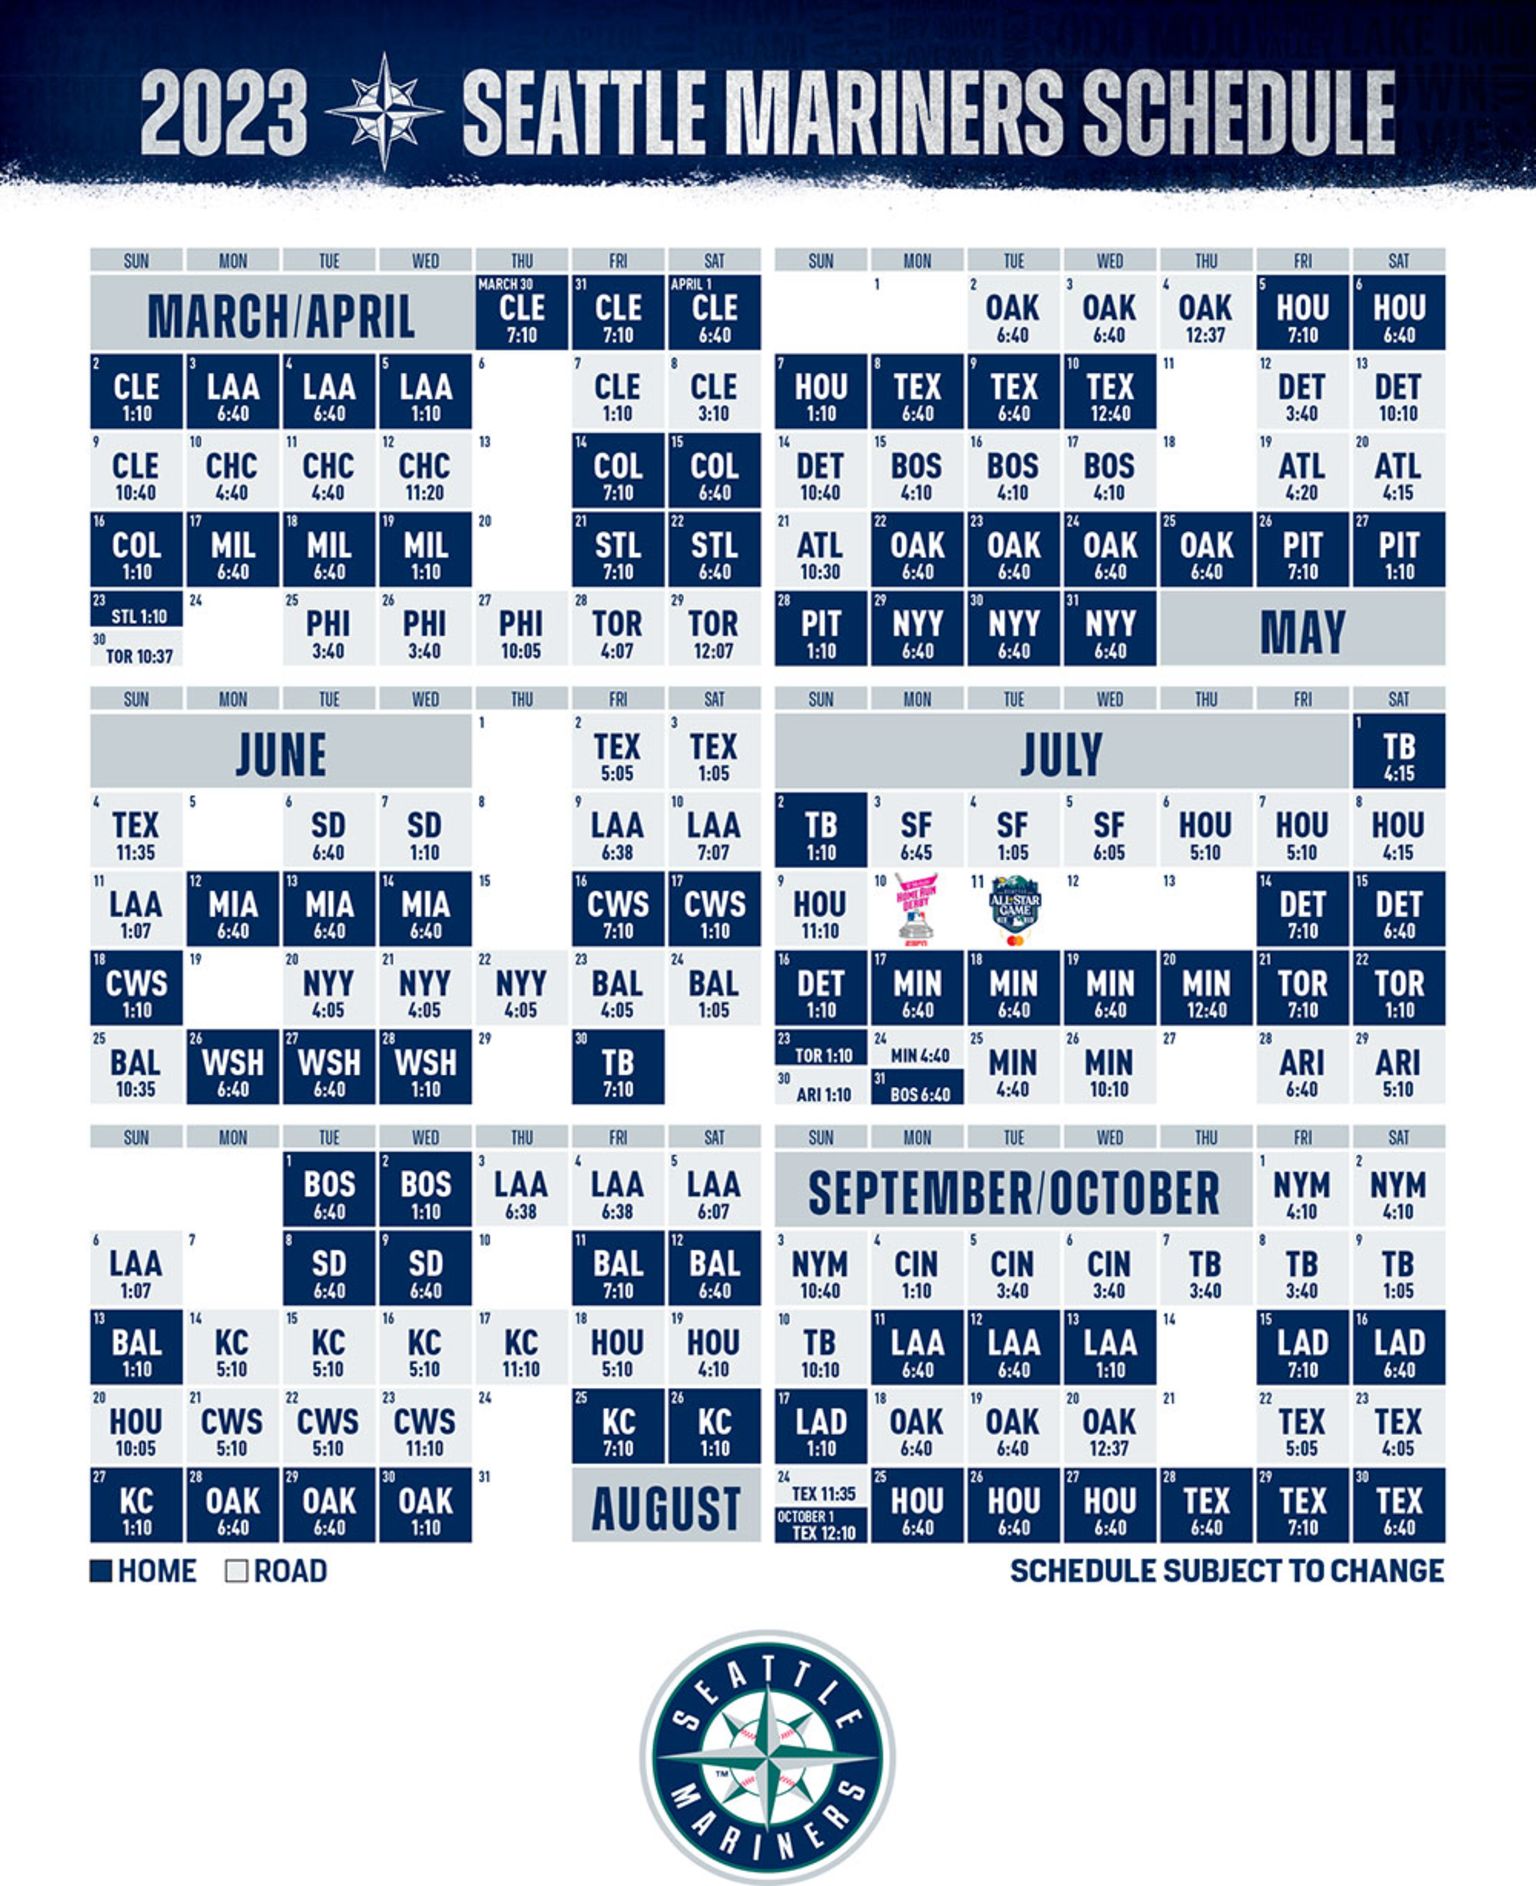 Seattle Mariners on Twitter Well open the 22 season at home on March 31  vs the Tigers Full Schedule  httpstcoD9sE4hYrbp  httpstcoeyvr8AmpFz  Twitter